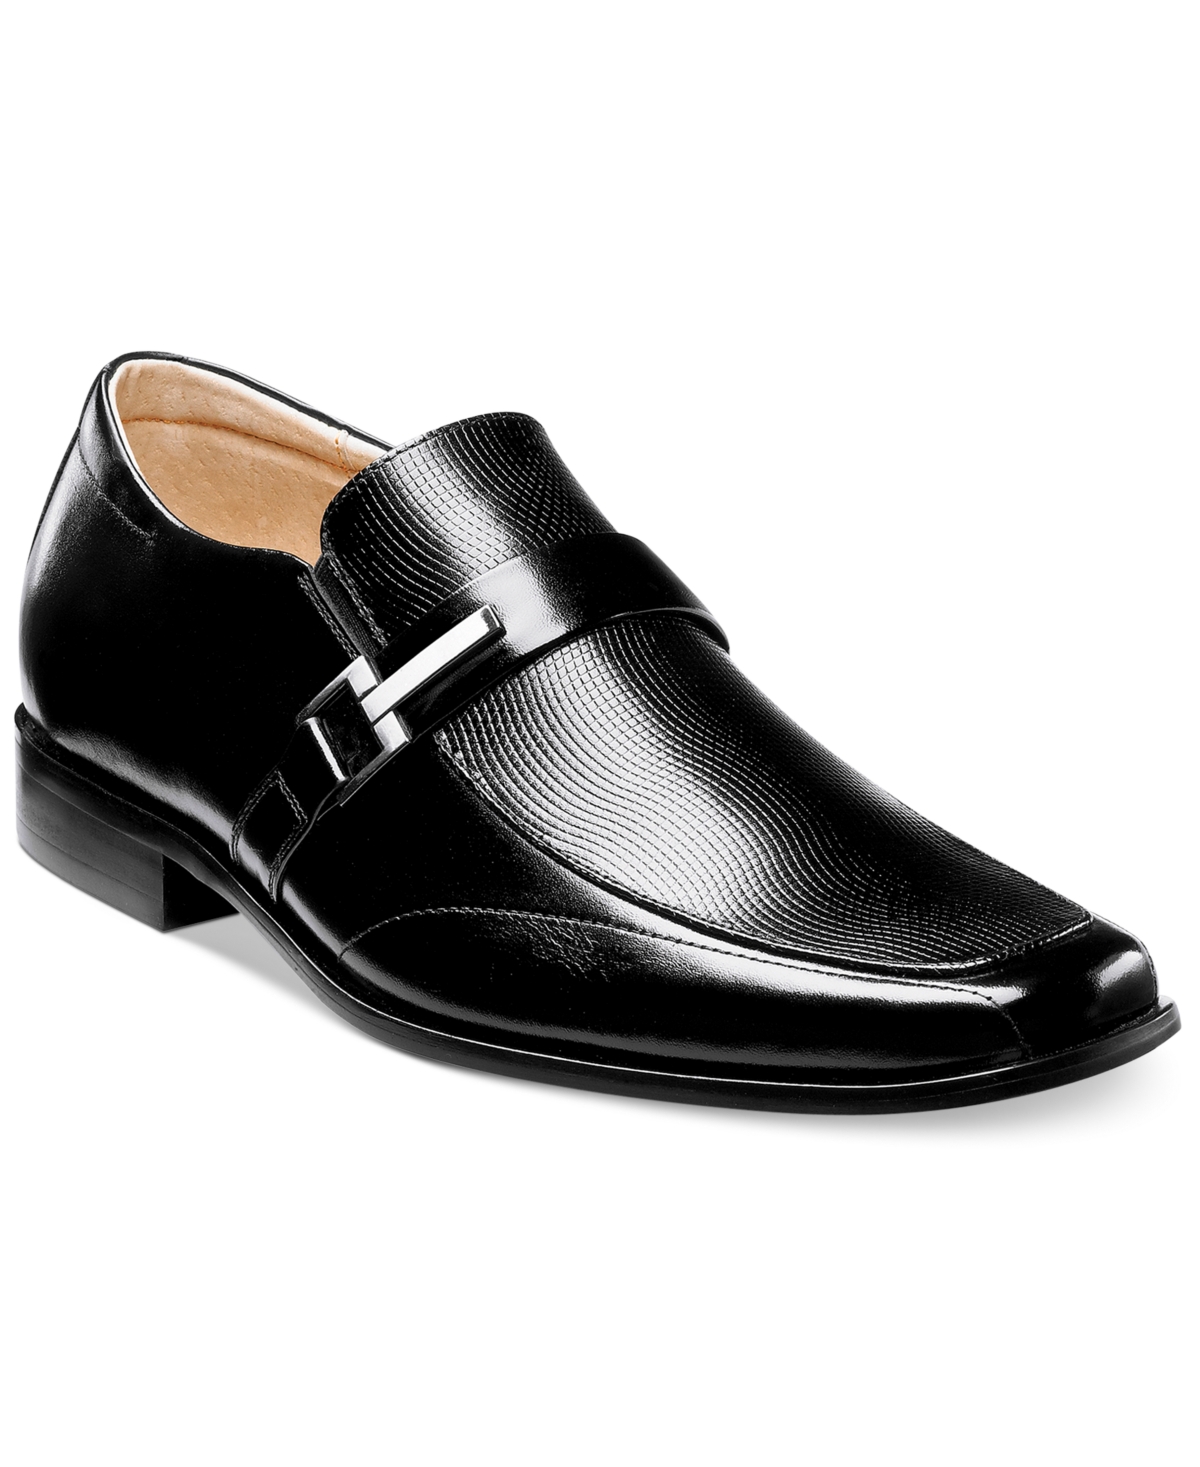 Men's Beau Bit Perforated Leather Loafer - BLACK